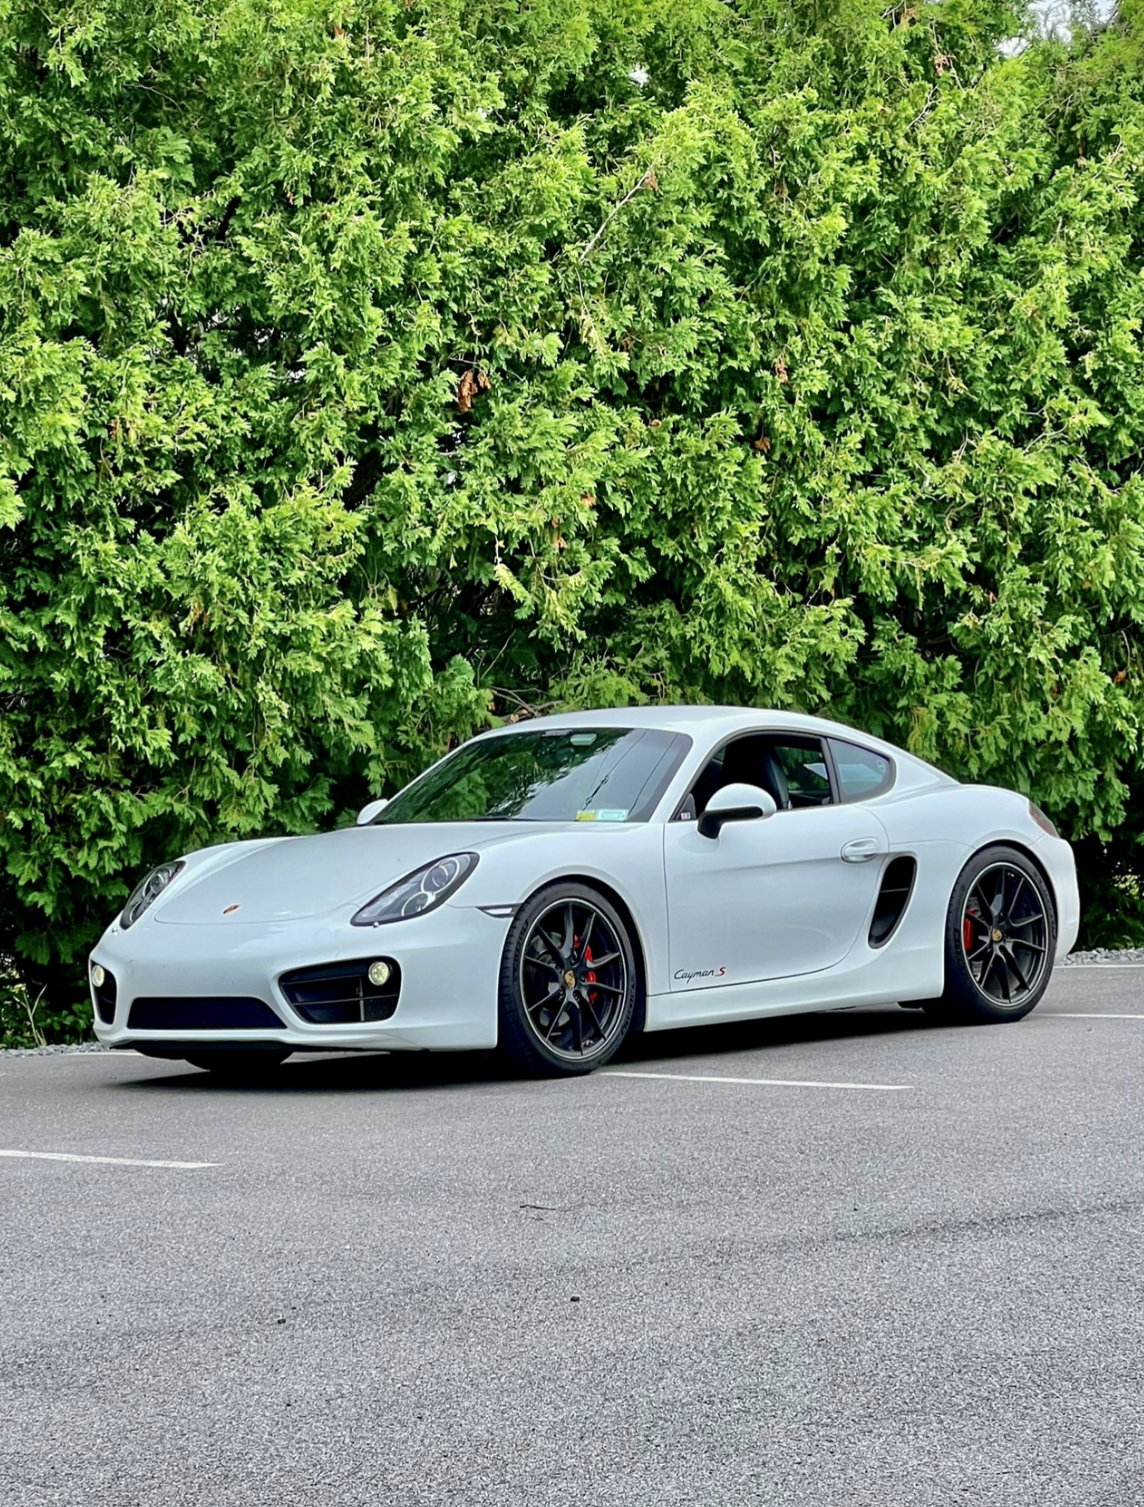 2015 Porsche Cayman - 2015 Cayman S 6MT / X73 / Highly Optioned / Fabspeed Headers - Used - VIN WP0AB2A83FK183244 - 40,350 Miles - 6 cyl - 2WD - Manual - Coupe - White - Burlington, VT 05408, United States